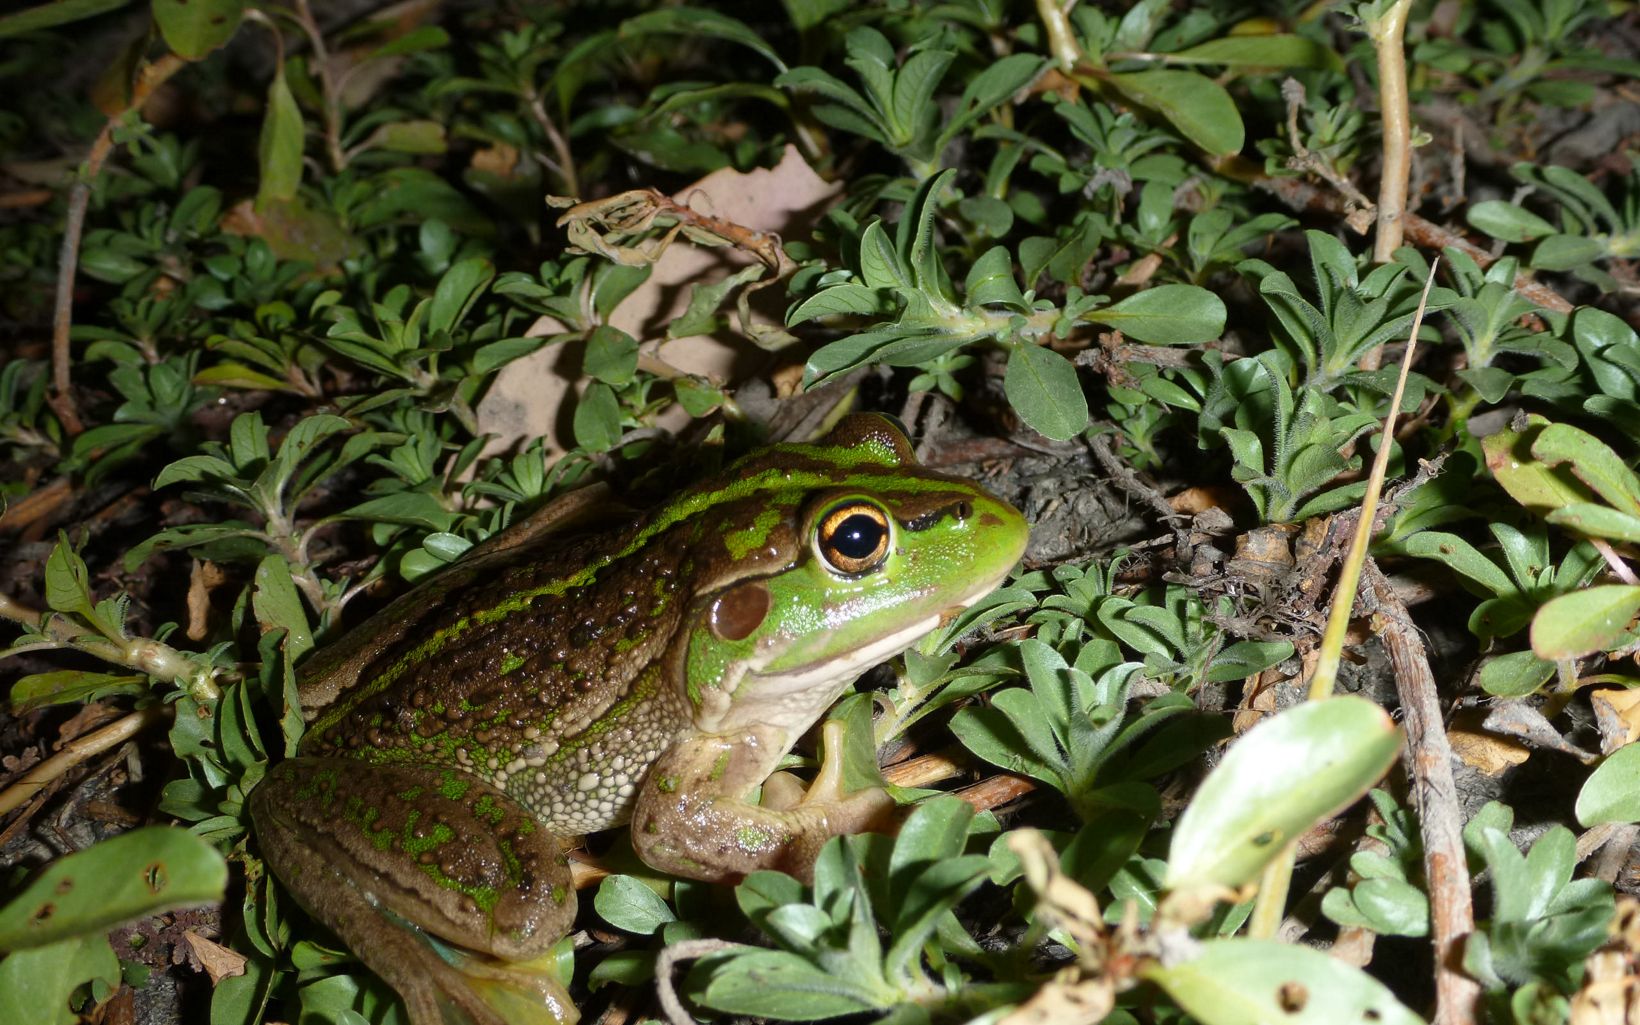 is one of the largest frog species in Australia.